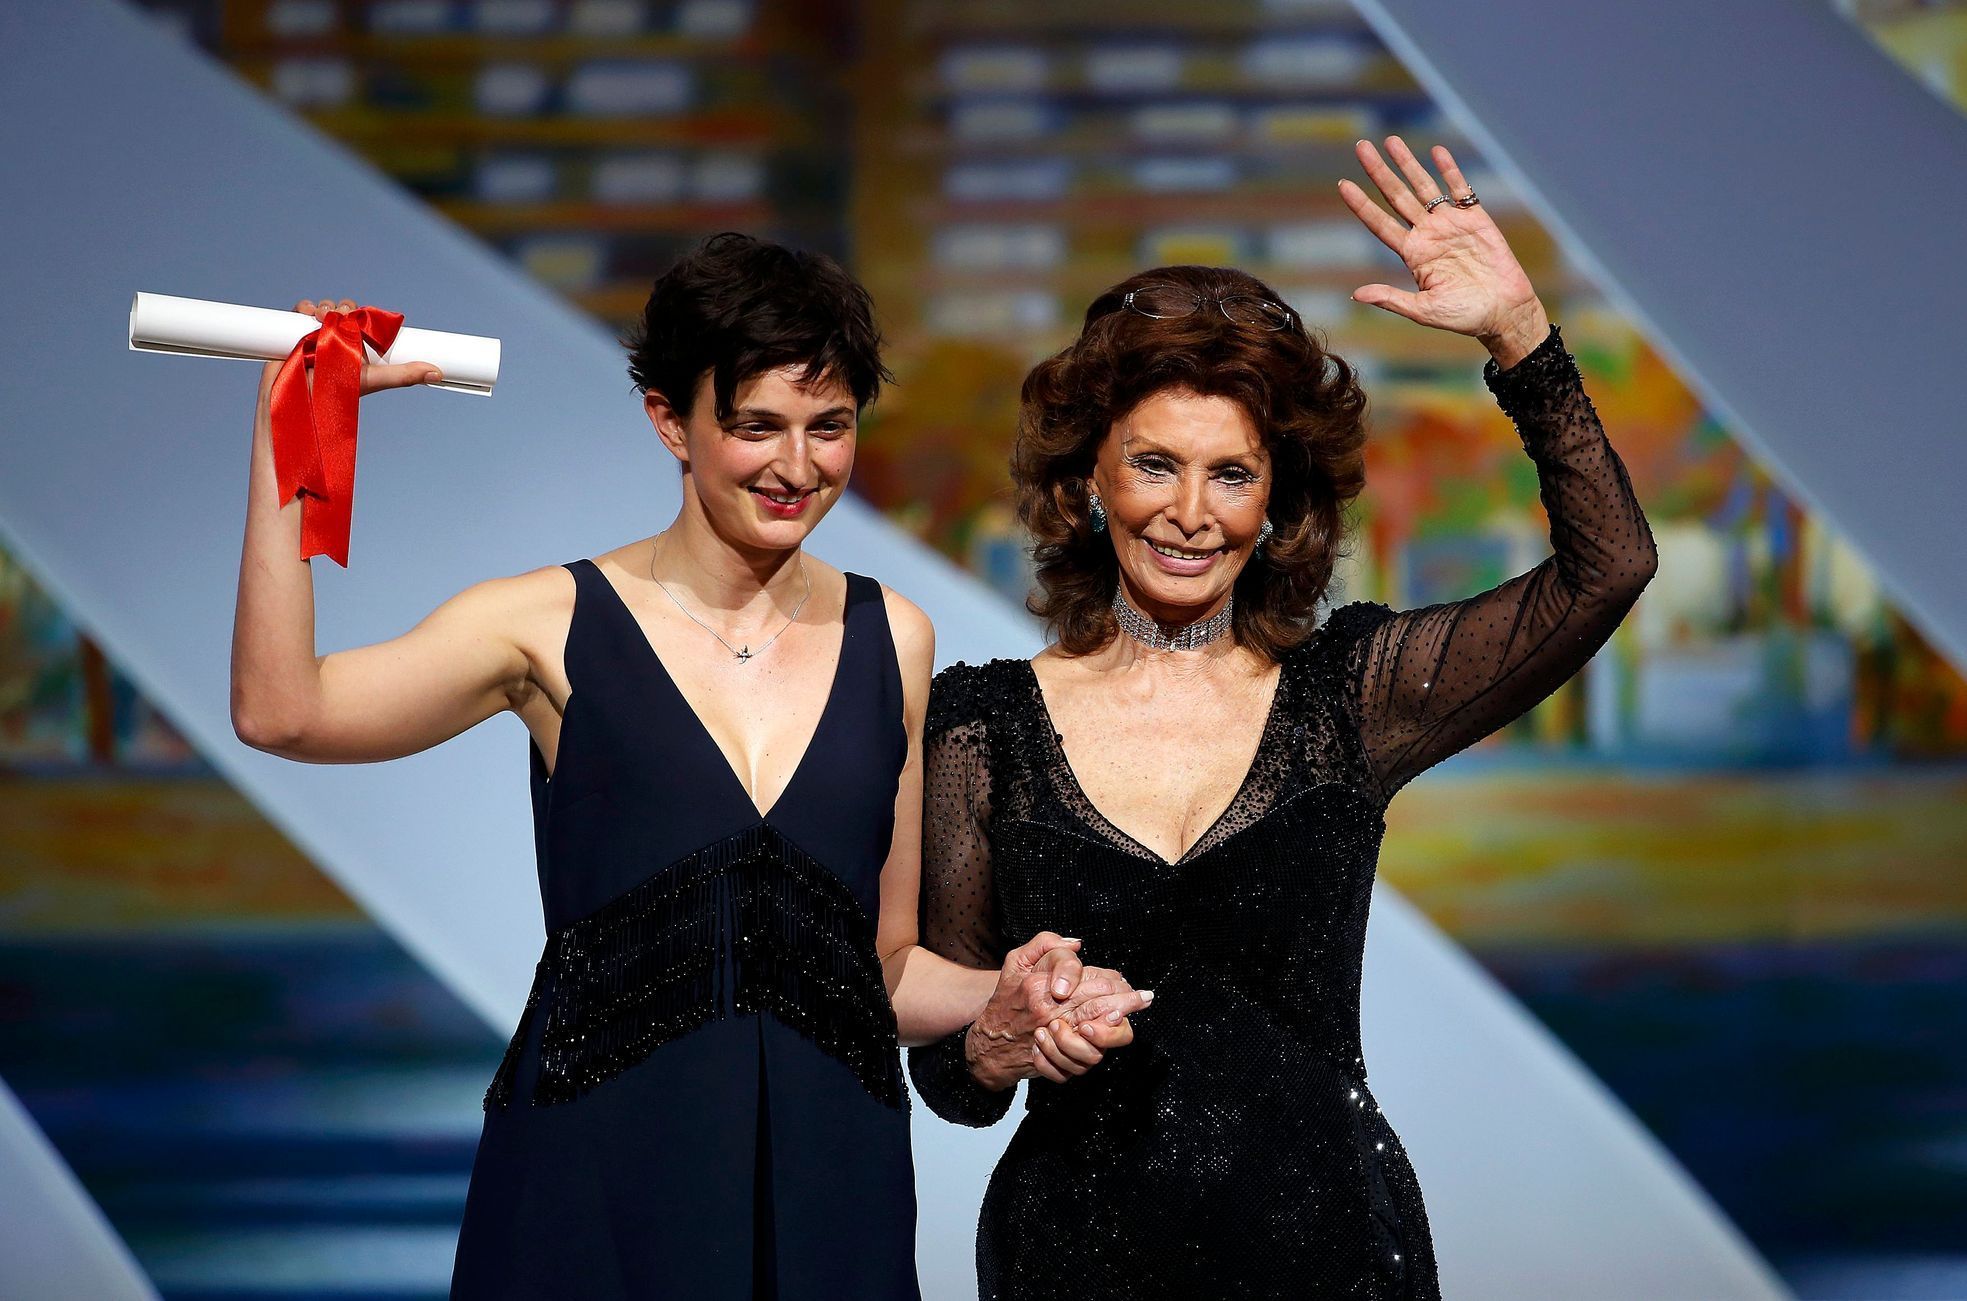 Director Alice Rohrwacher, Grand Prix award winner for her film &quot;Le meraviglie&quot;, poses on stage with actress Sophia Loren during the closing ceremony of the 67th Cannes Film Festival in Cann